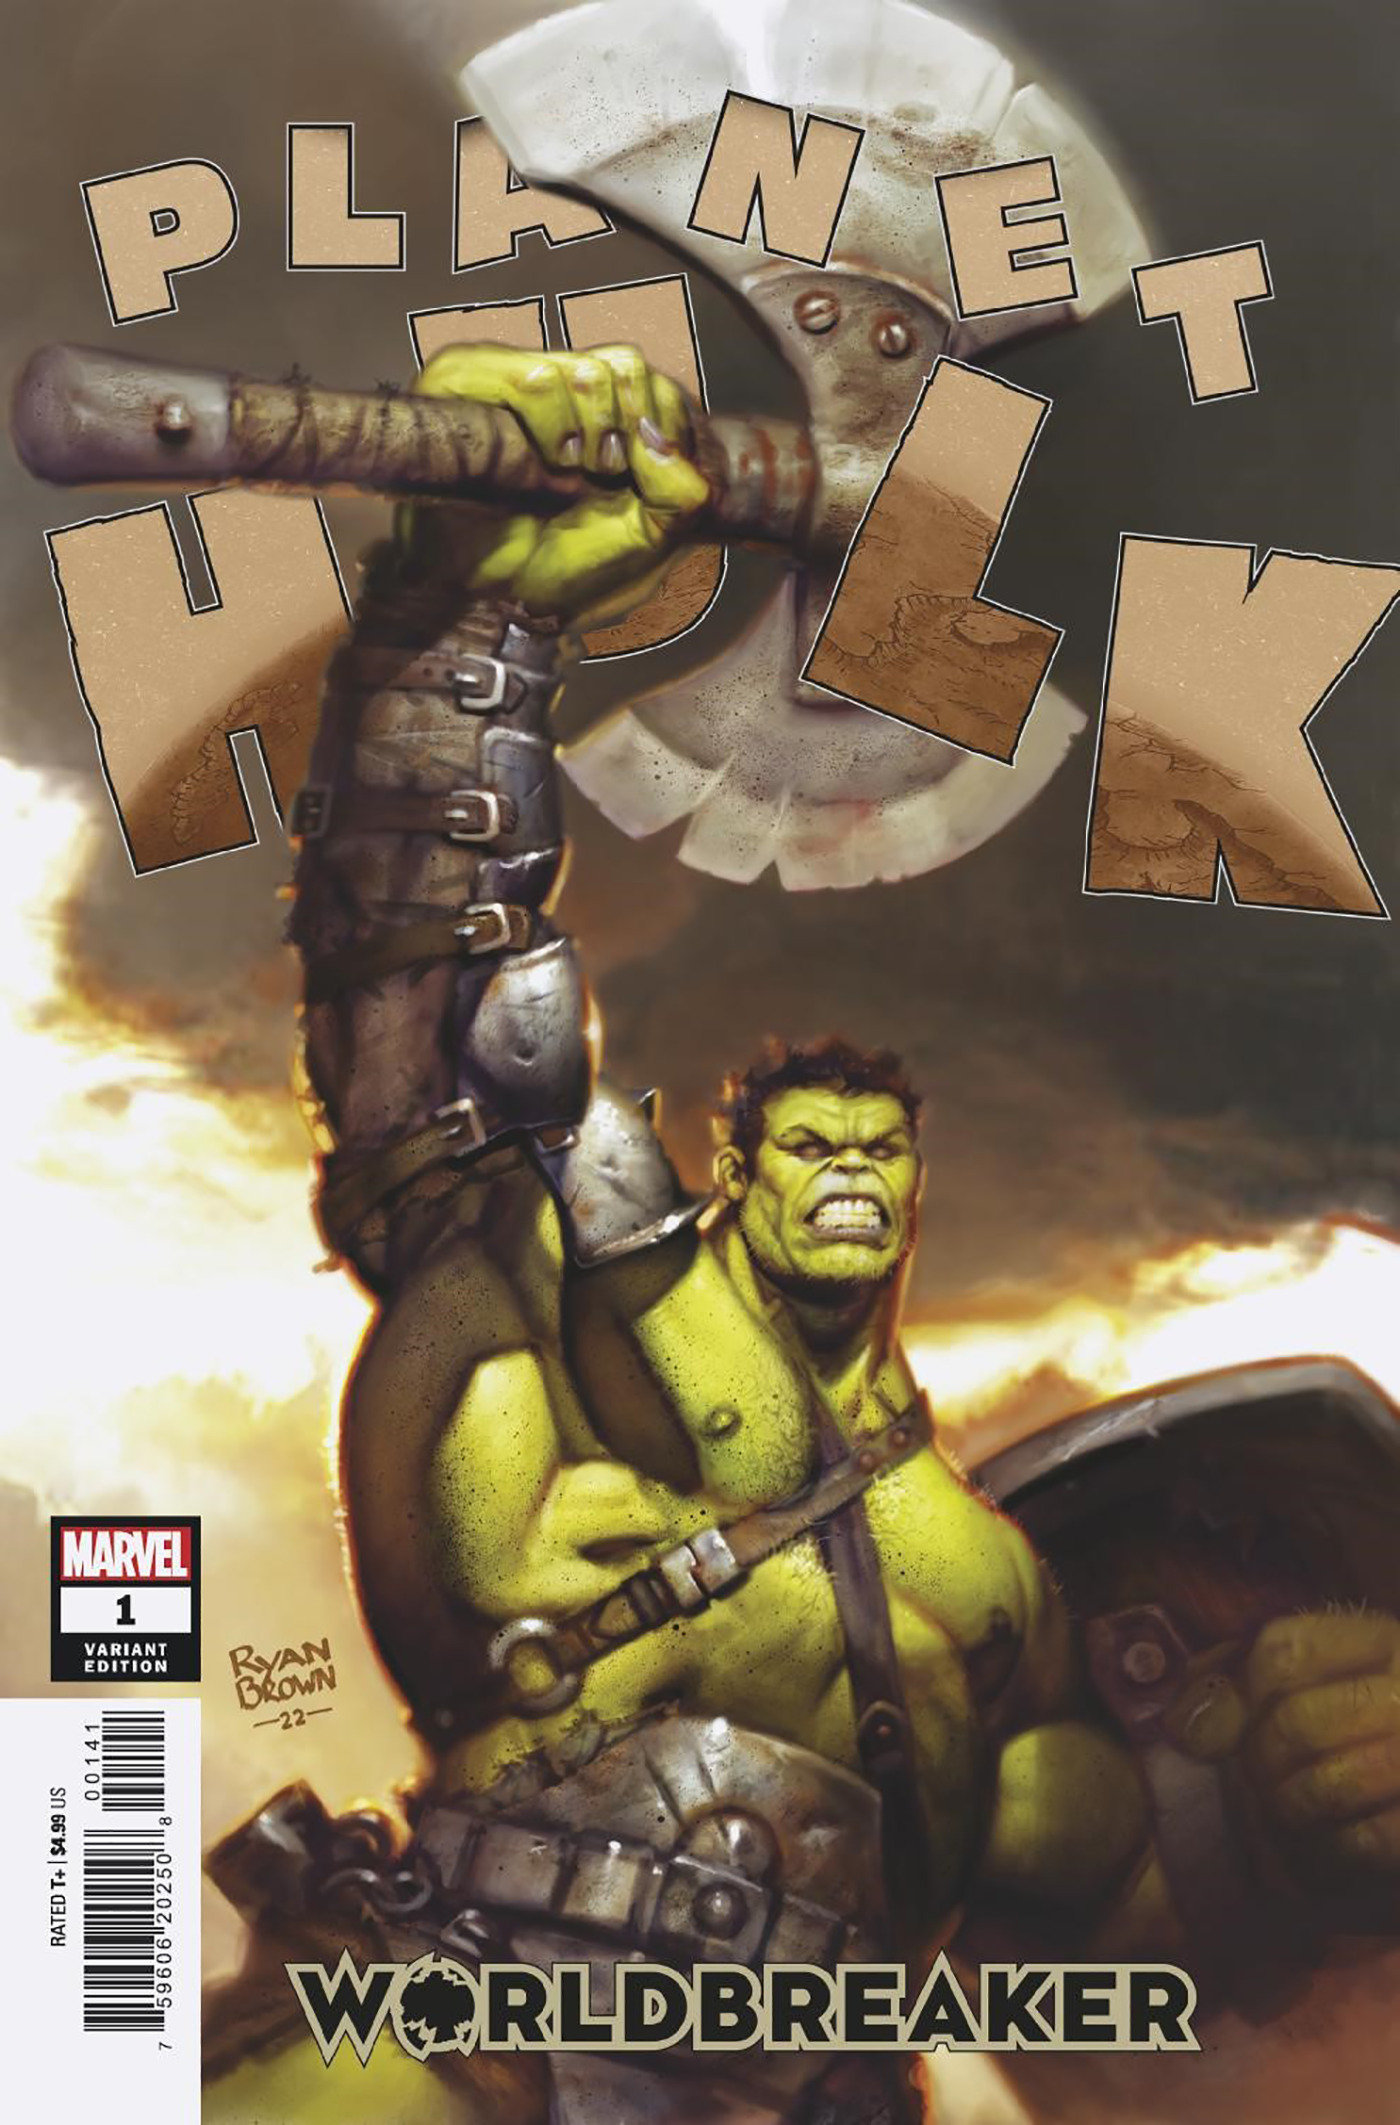 Planet Hulk Worldbreaker #1 1 for 50 Incentive Brown Variant (Of 5)